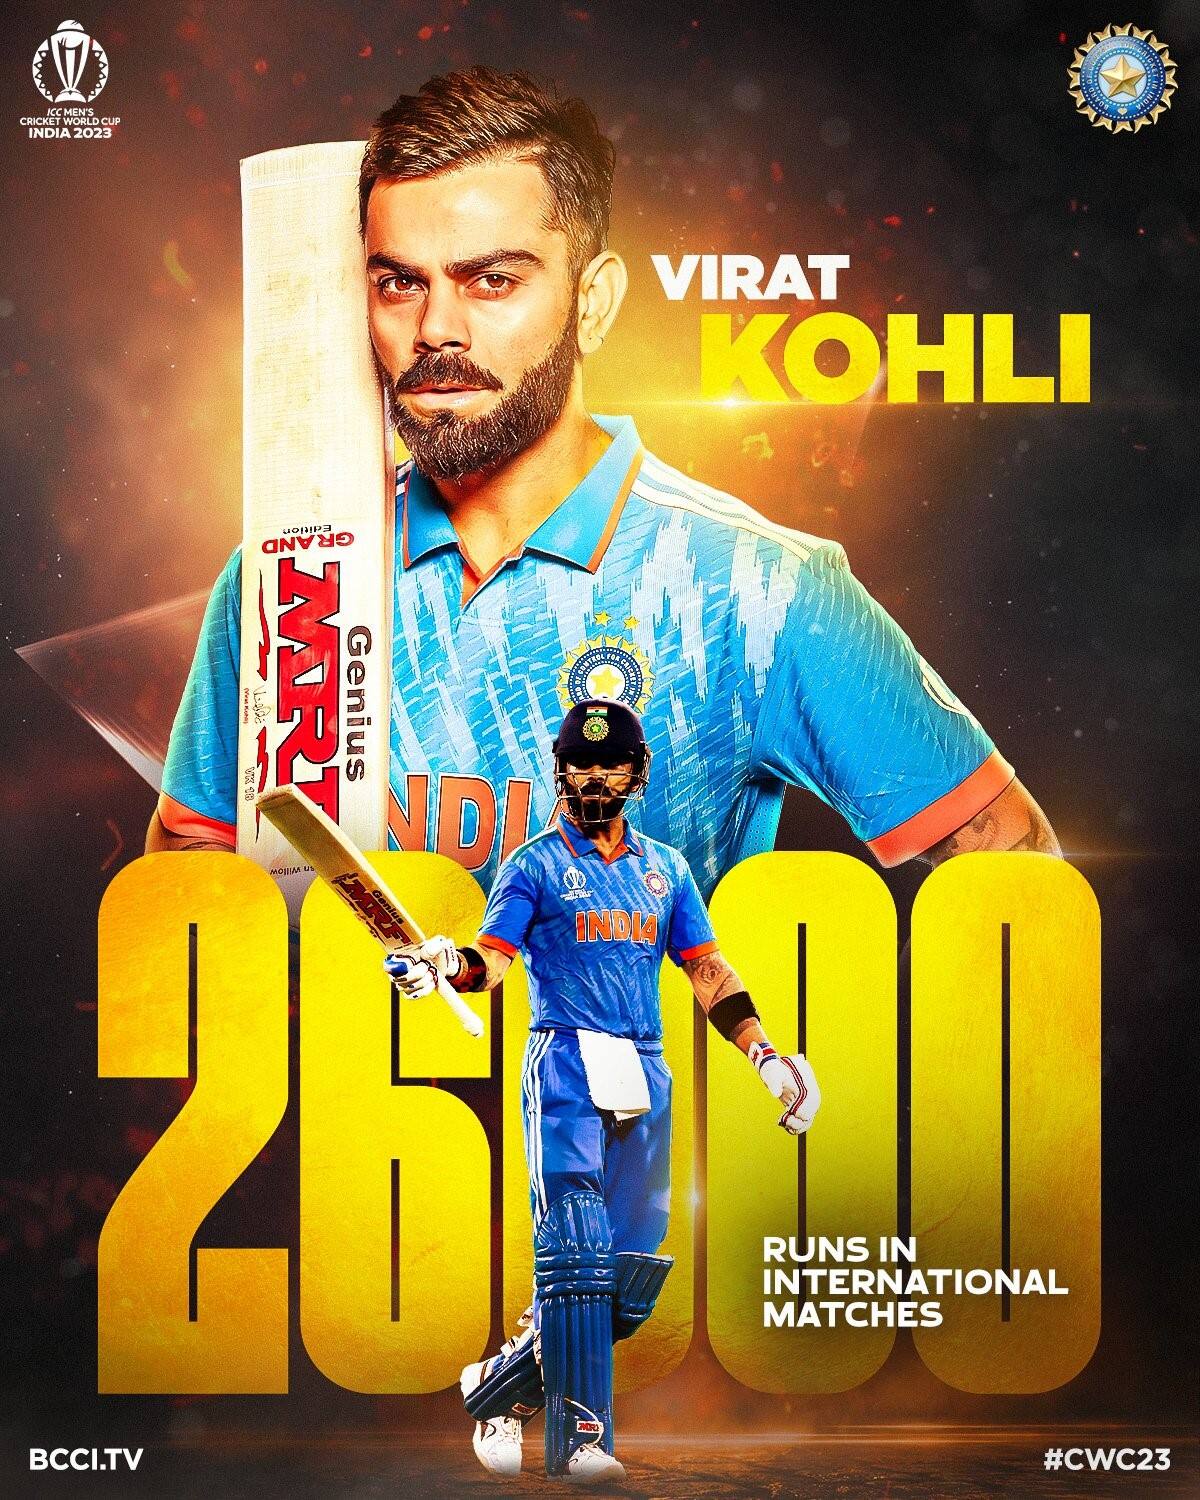 After 8 Years Virat Kohli scored a World Cup century During IND vs BAN Match at Pune rsk